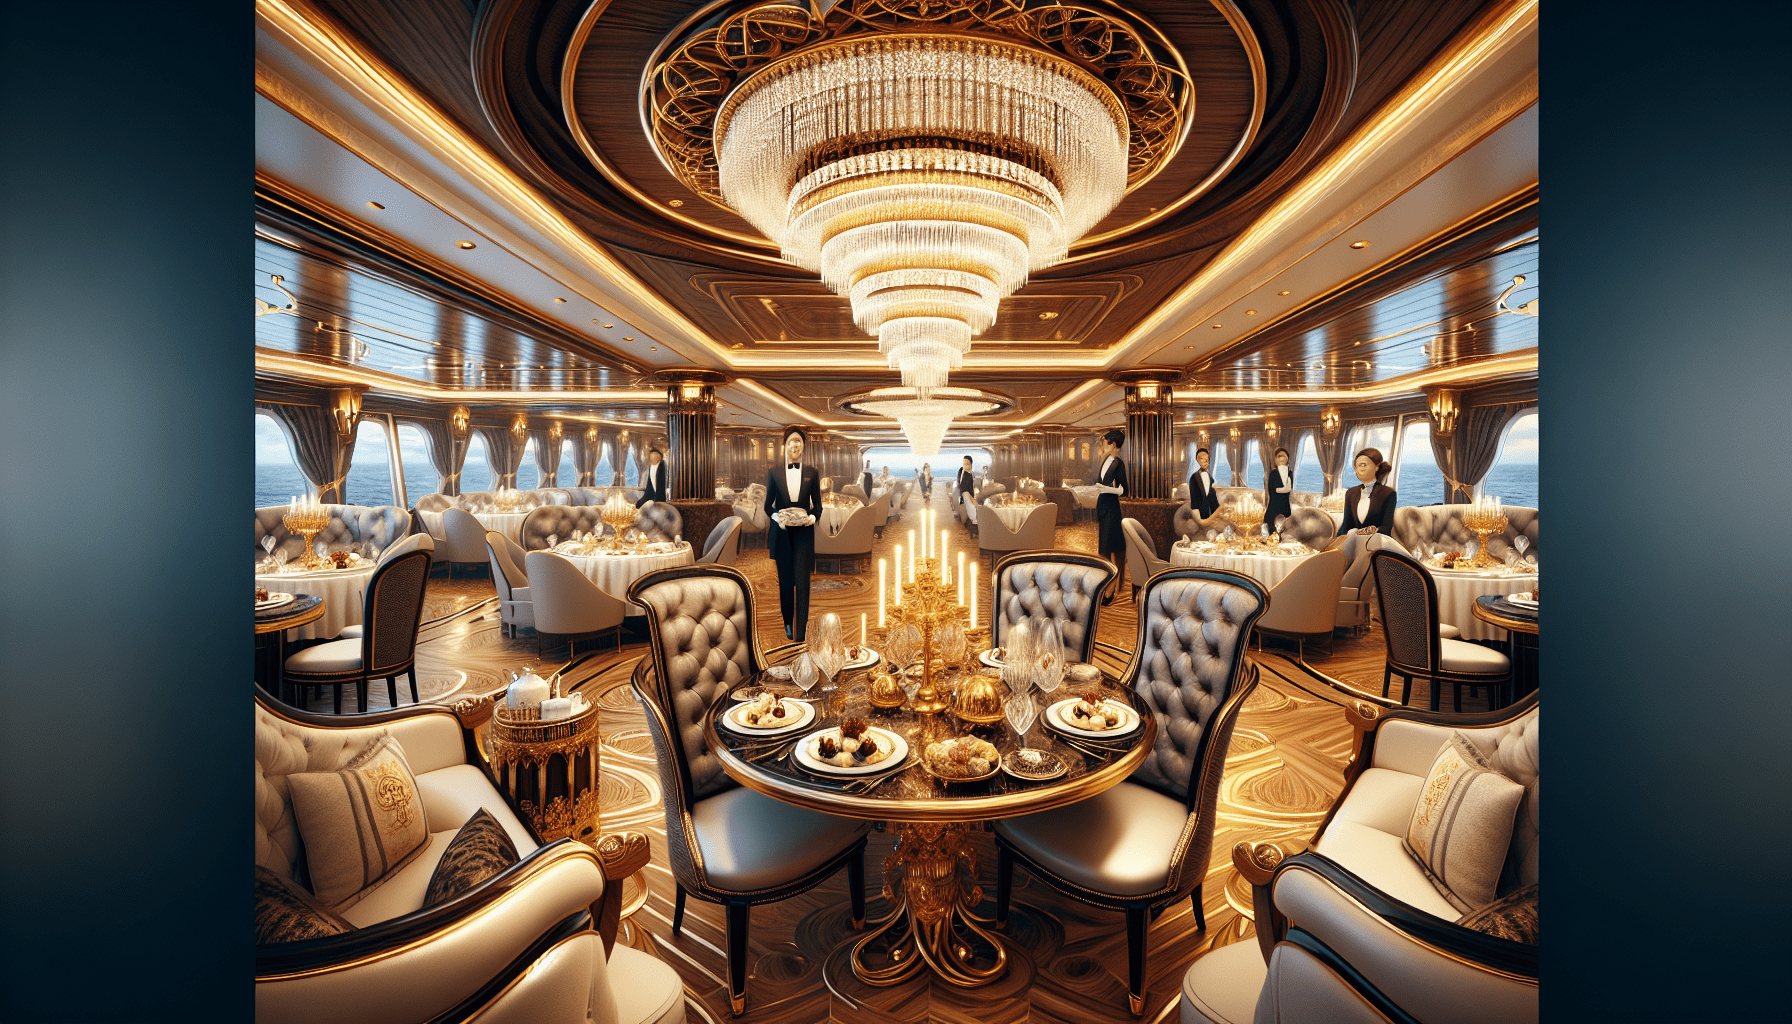 What Is The Highest Class Of Cruise Ships?